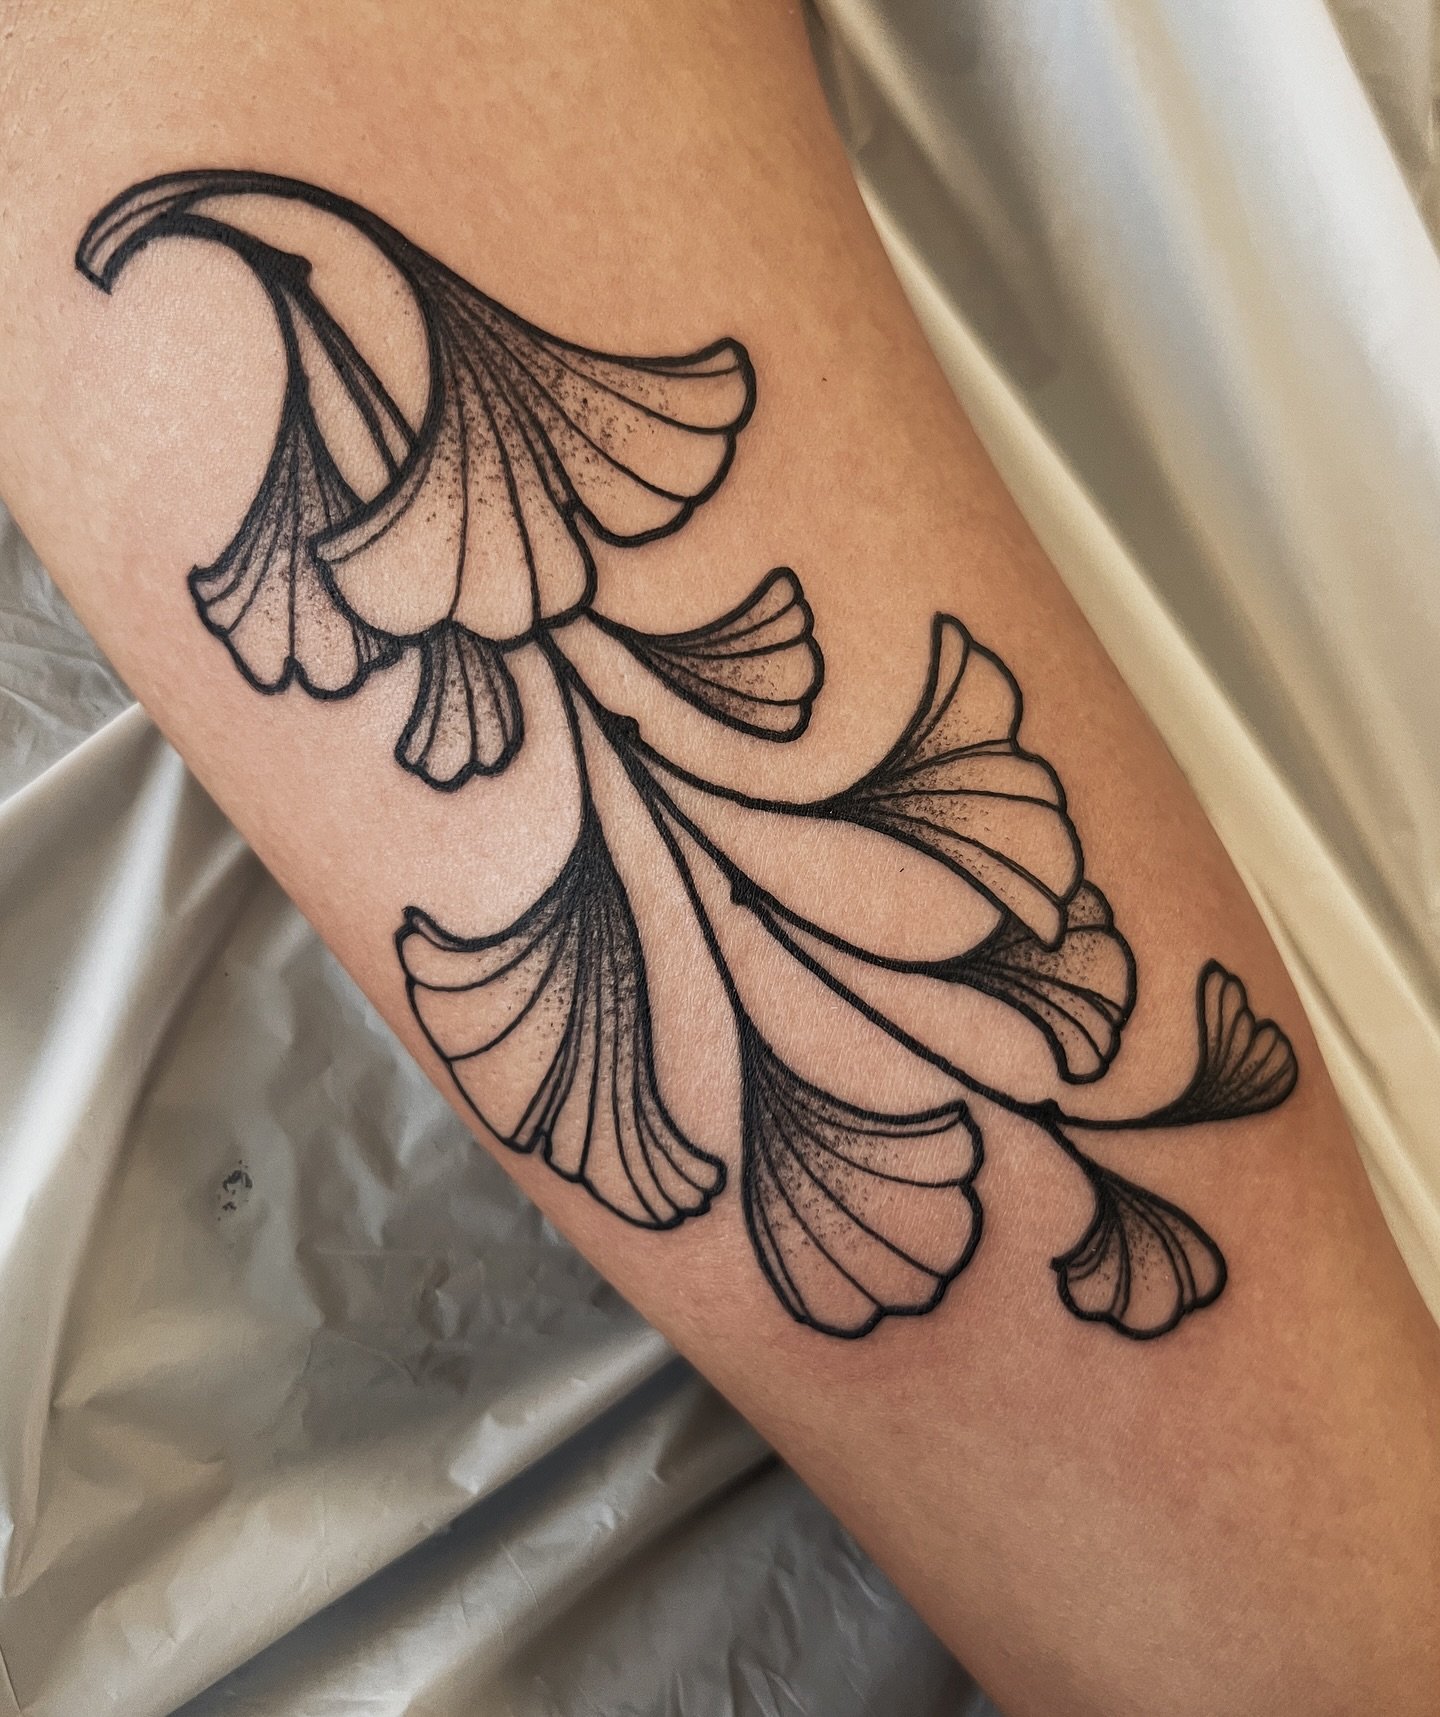 A first tattoo of some Ginkgo leaves for Kelly! Thanks for your trust!!! 
.
.
.
#ginkgoleaves #ginkgo #lineworktattoo #seattletattoo